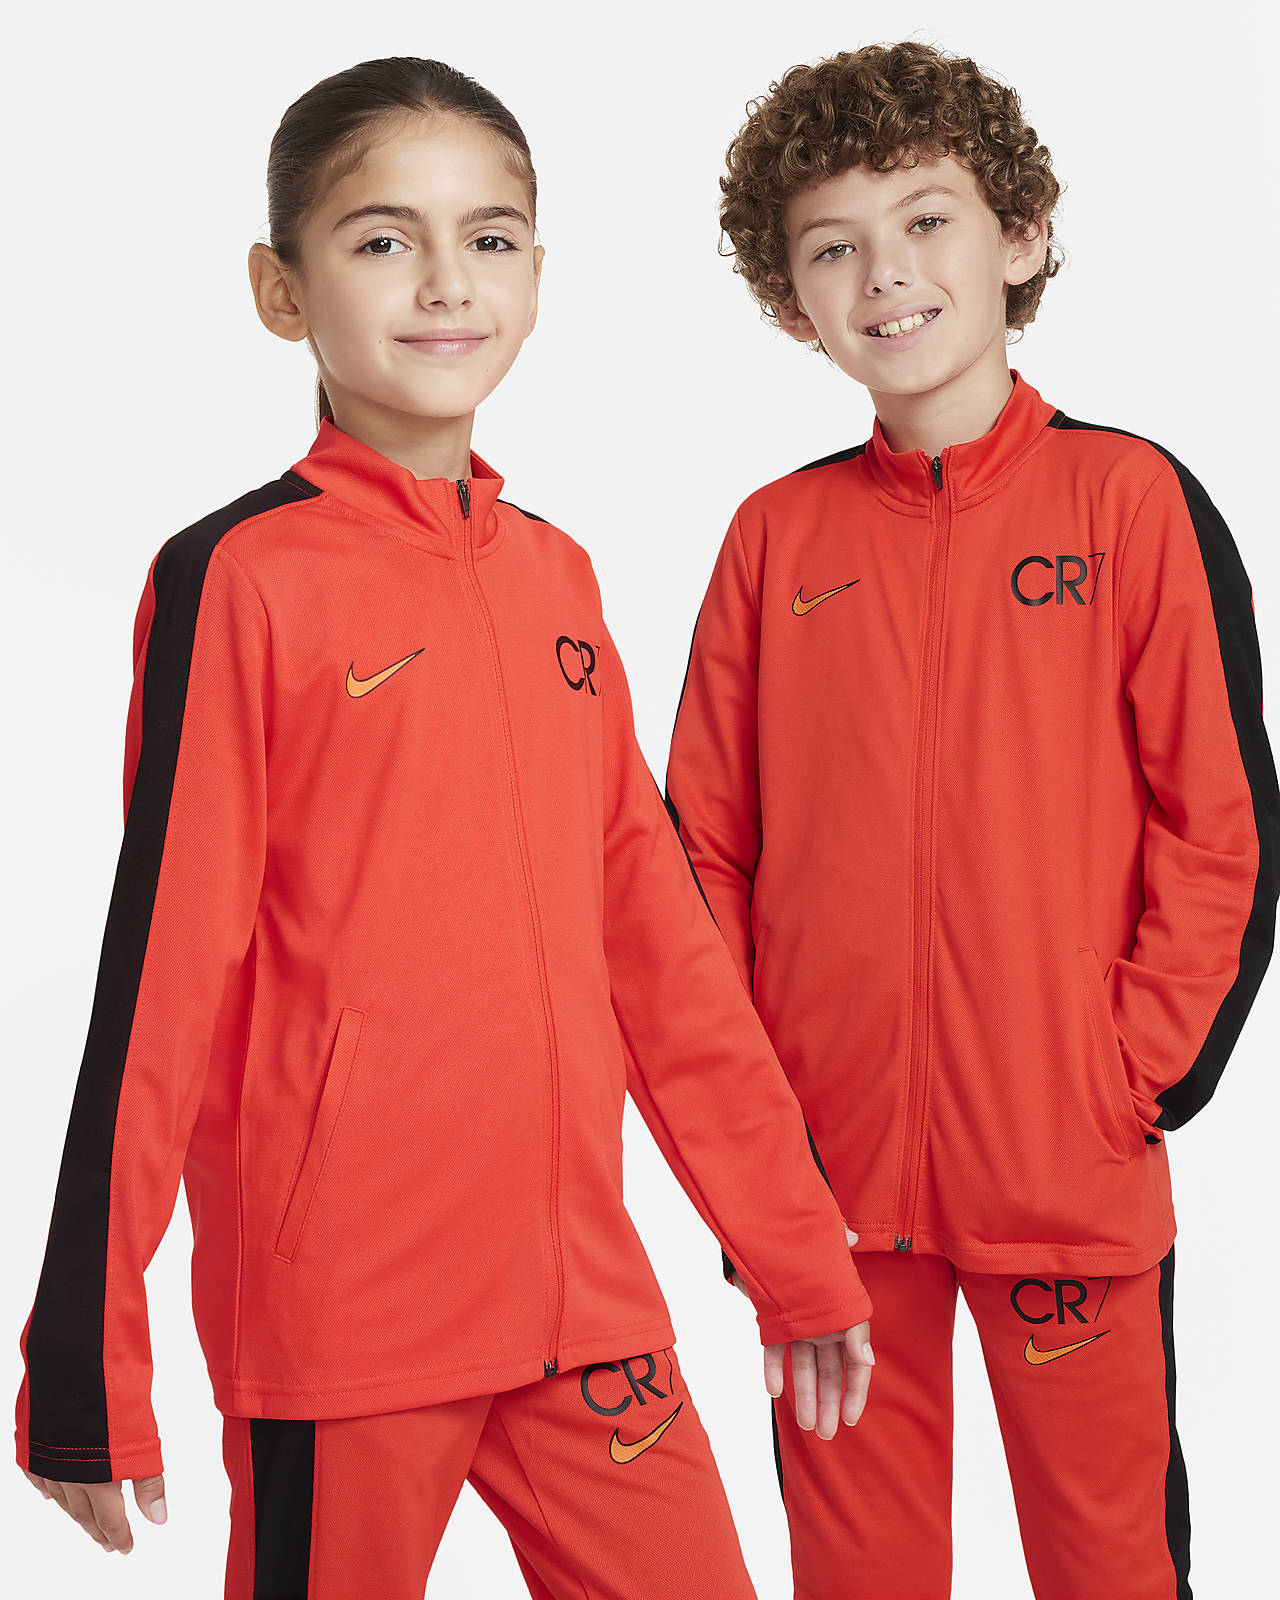 RYDLE Kids Cristiano Ronaldo Pullover Hoodie Sweatshirt and Sweatpants  Set-CR7 Tracksuit 2 Piece Outfits for Boys Girls : : Clothing,  Shoes 